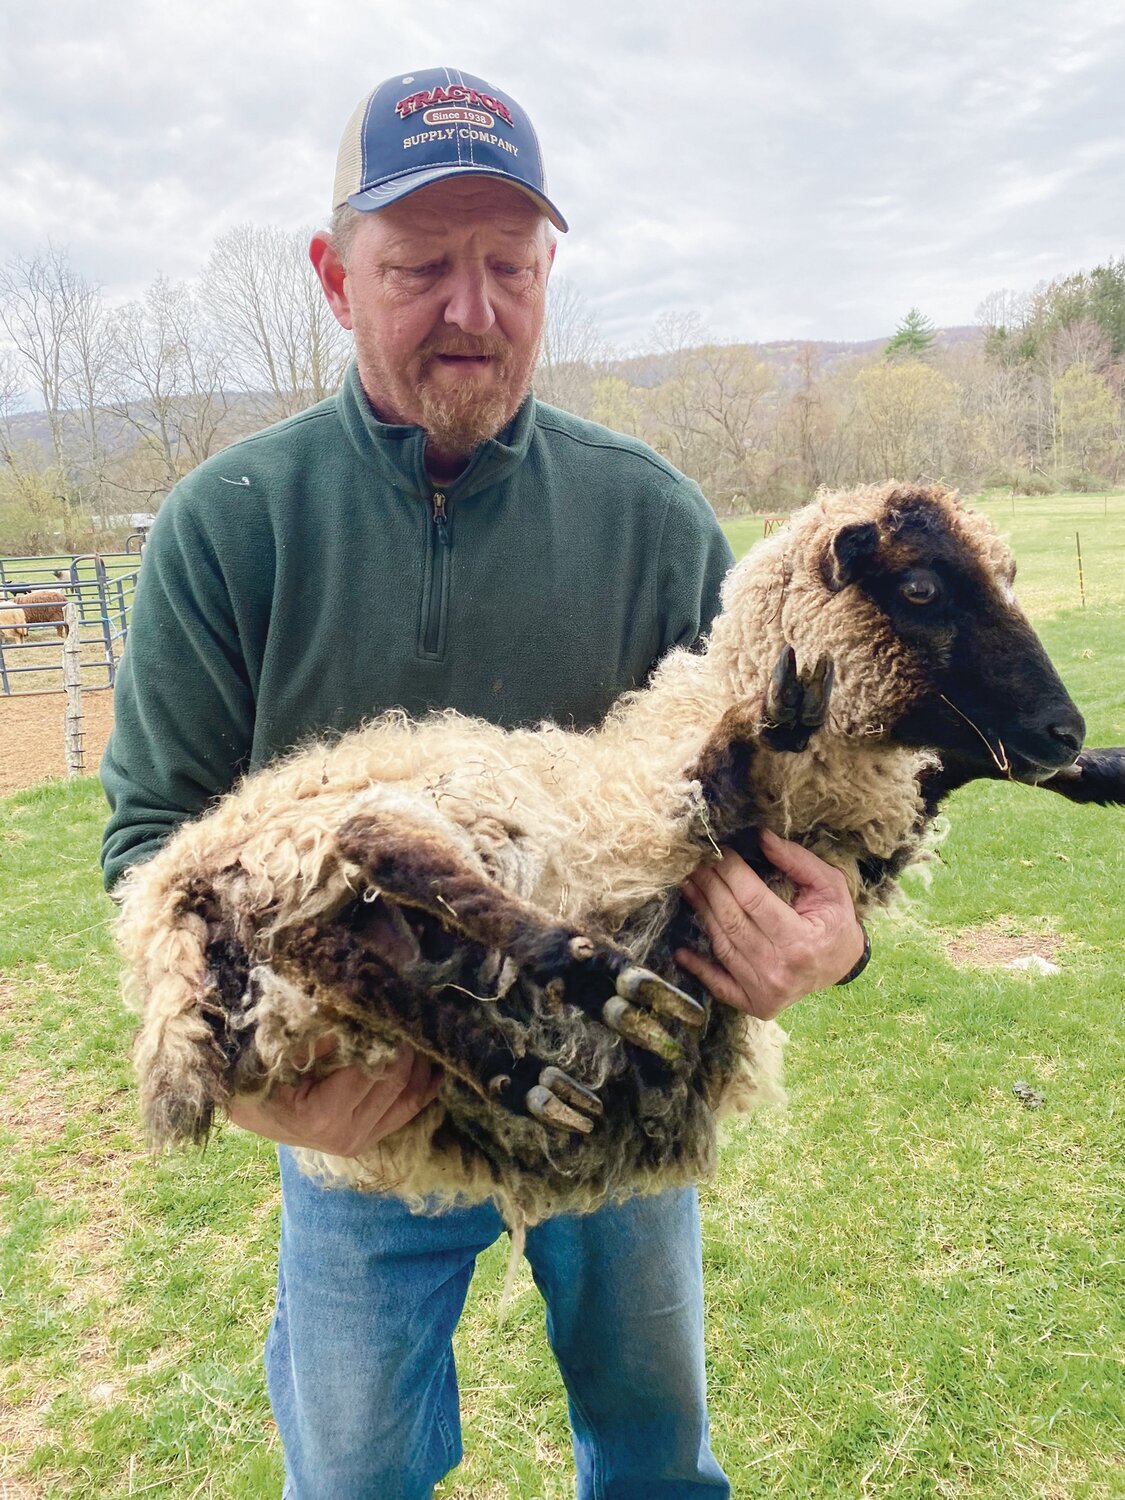 Shetland sheep are small-bodied; and here a skilled shepherd makes use of his size and strength to carry a ewe to the shearer lessening the stress on the animal about to be sheared.